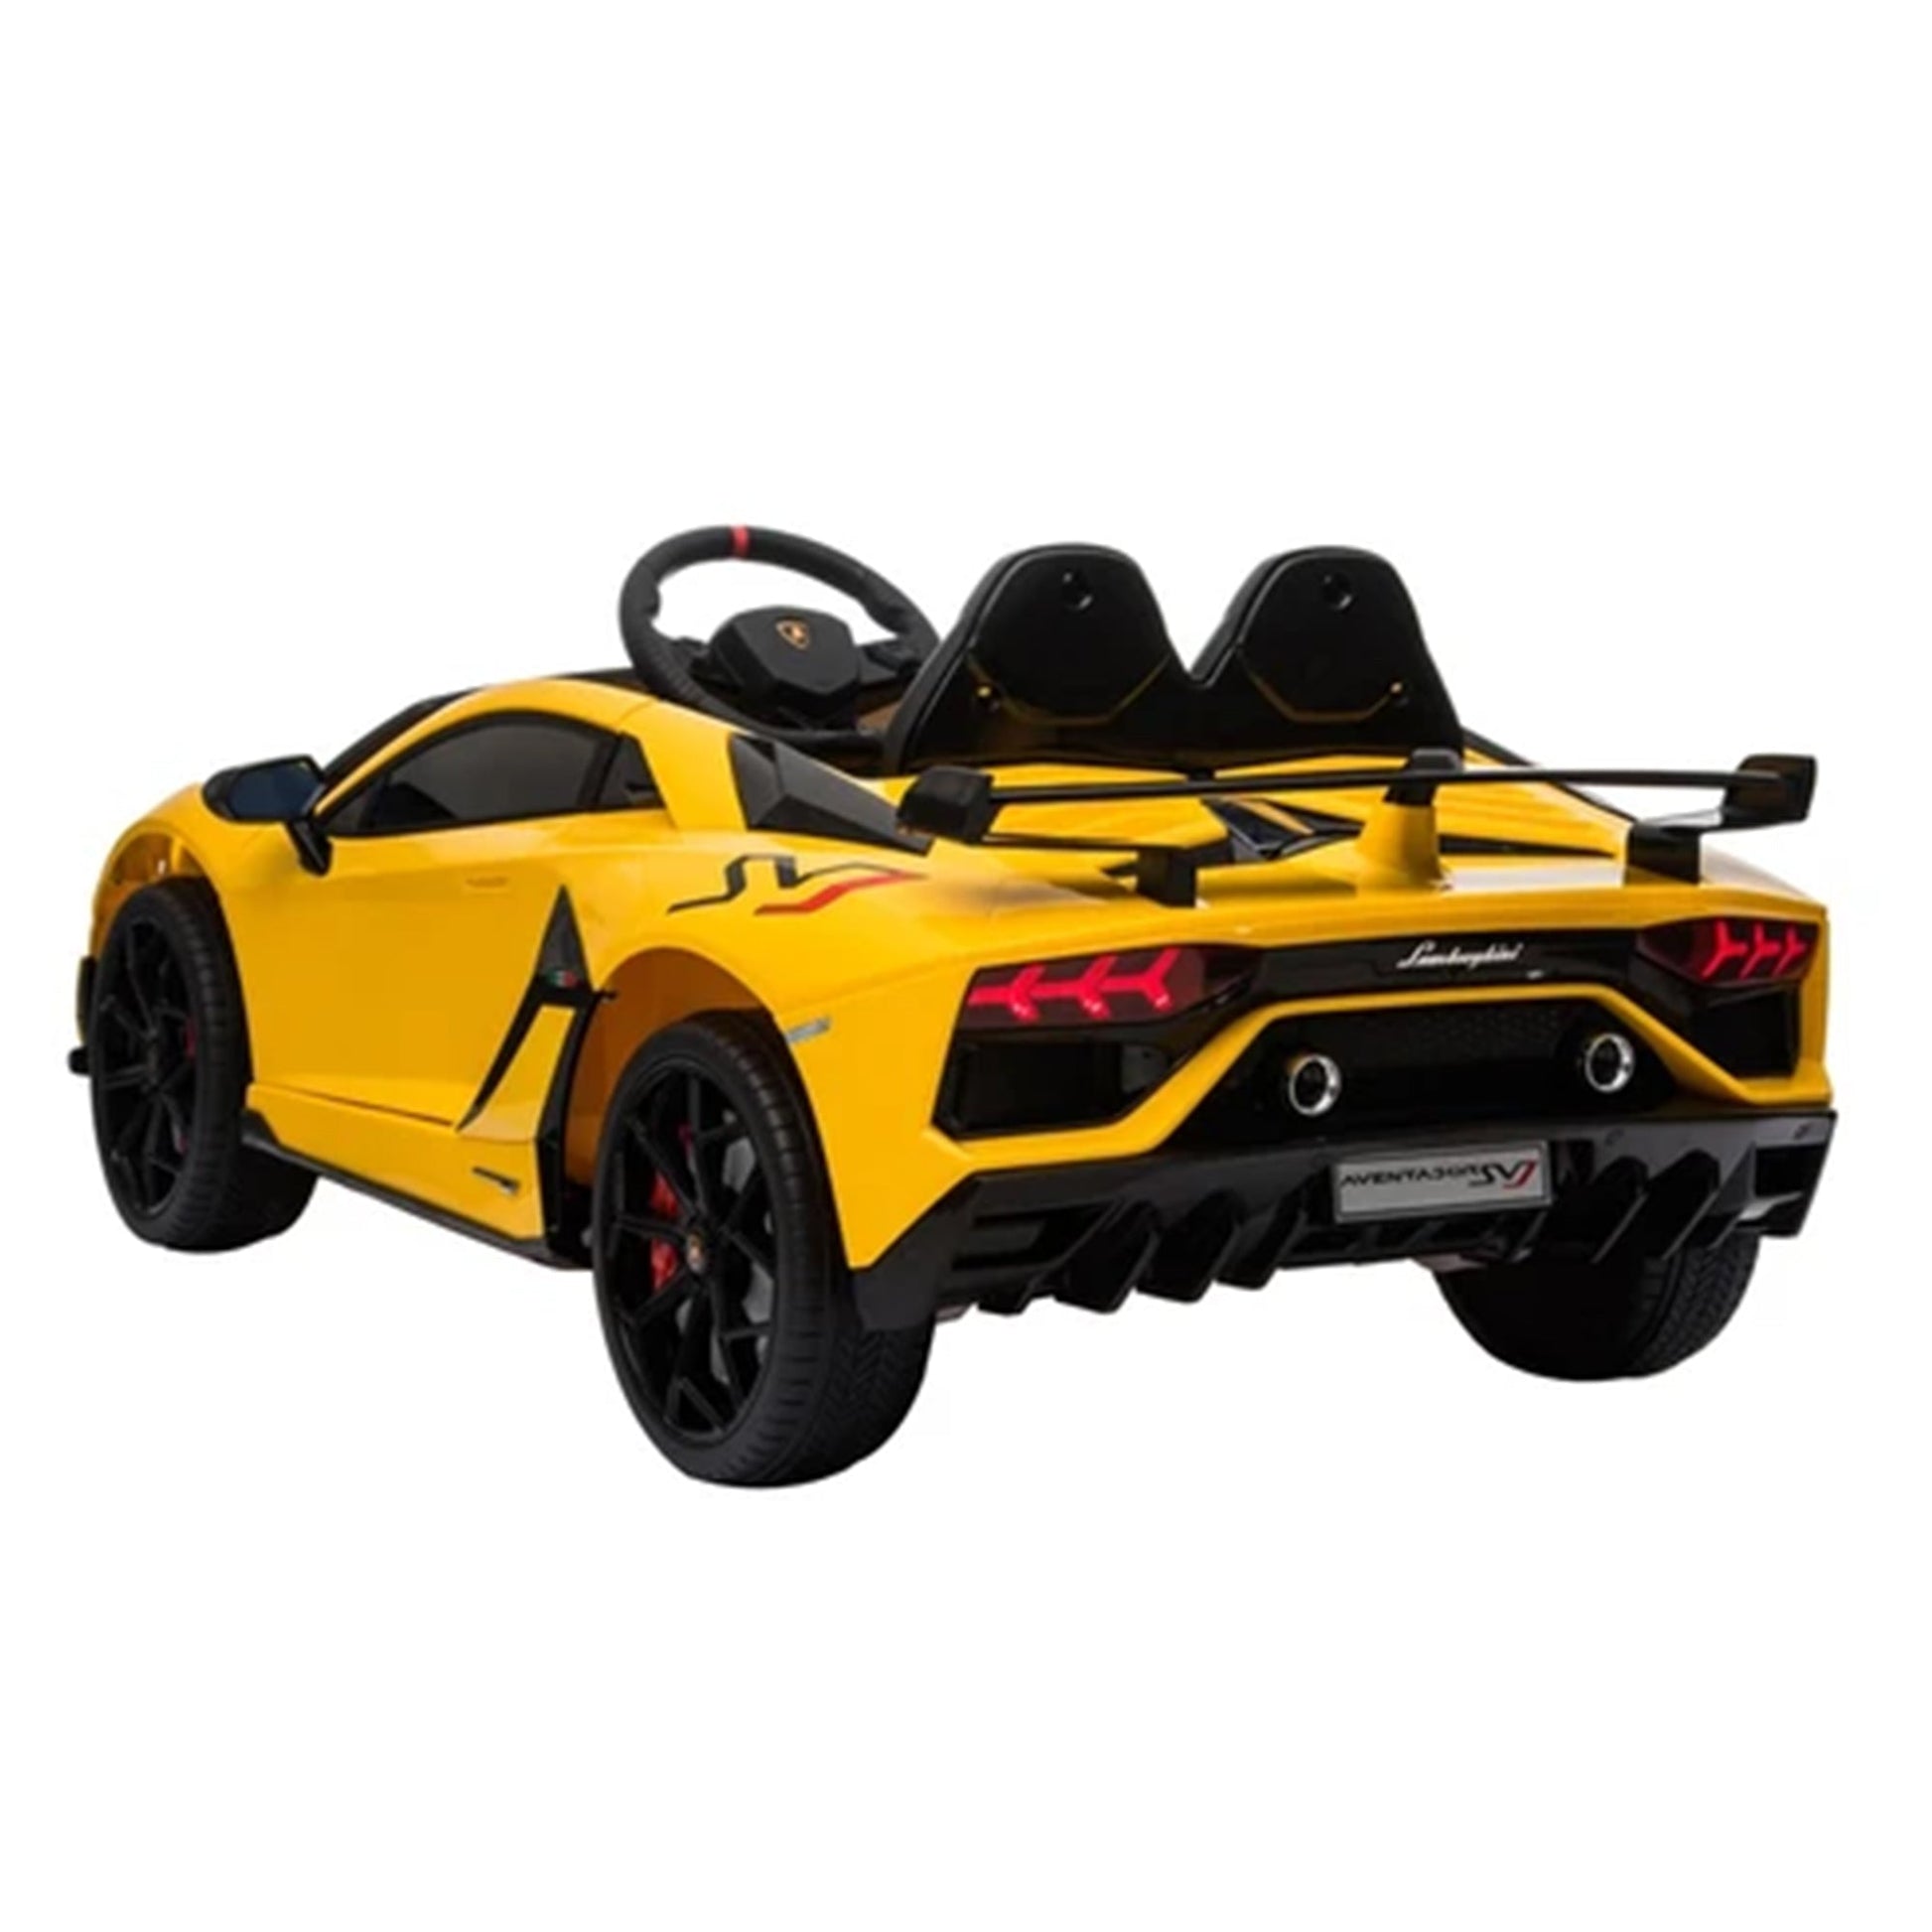 "Yellow 12 Volt Lamborghini SVJ electric ride-on from KidsCar.co.uk with leather seat and parent remote."